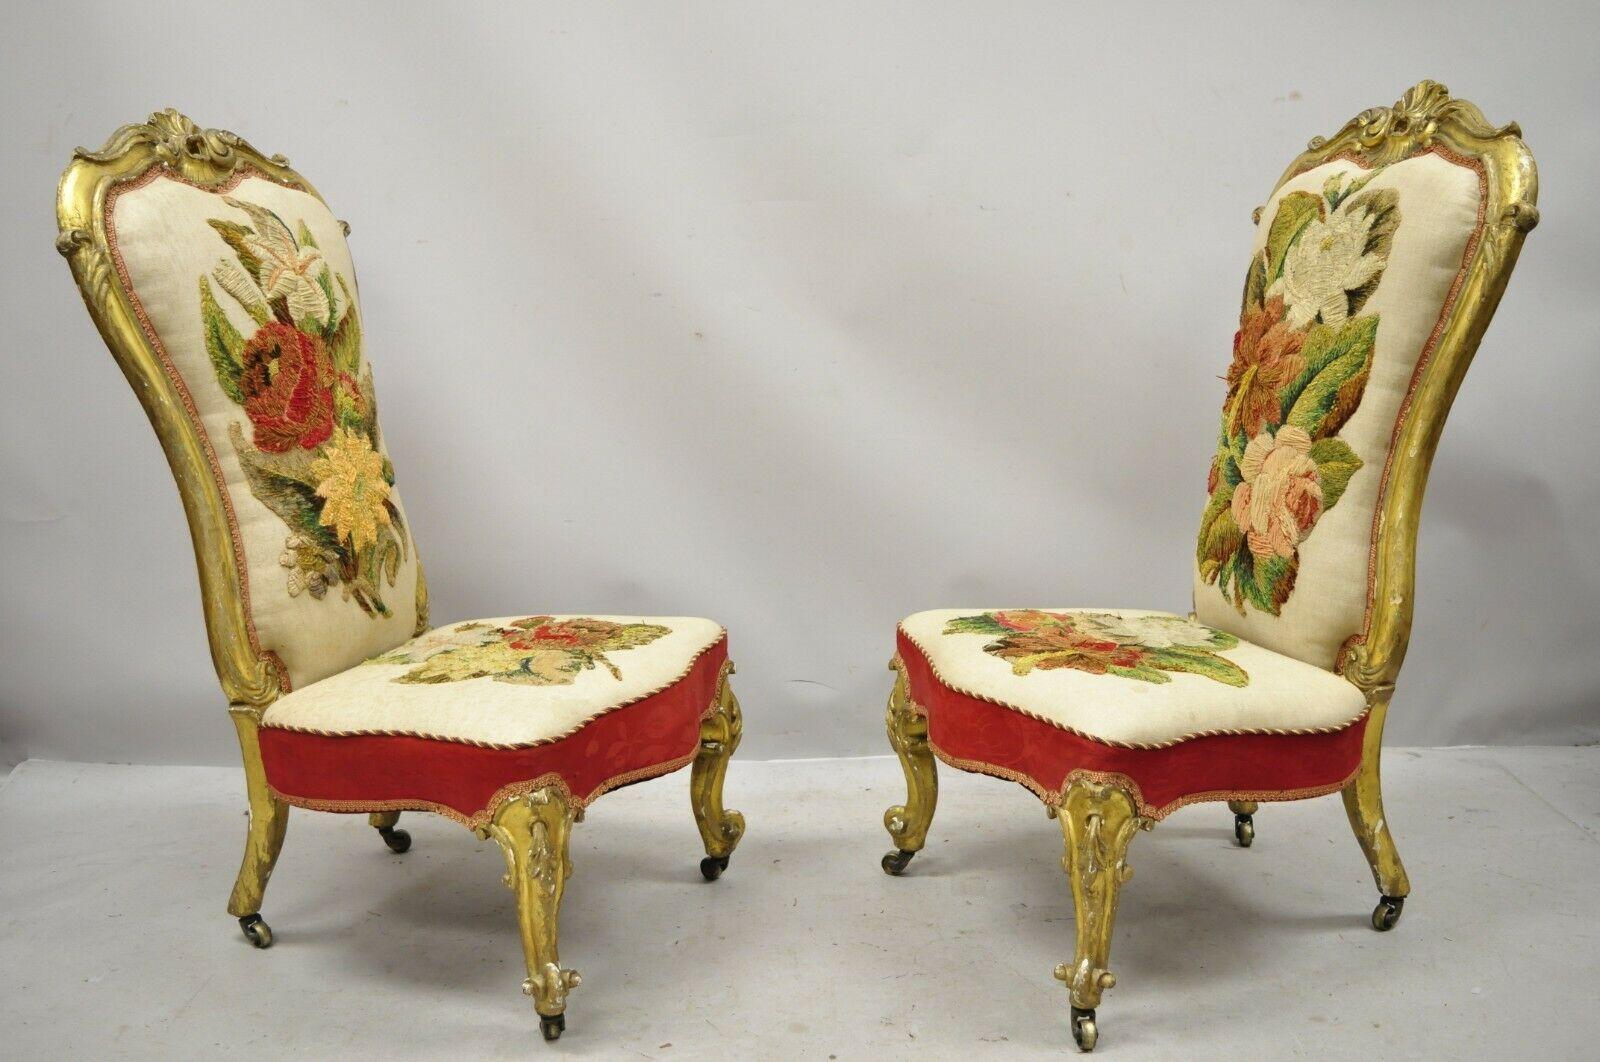 Antique French Victorian gold gilt Rococo Revival Slipper Parlor chairs - a pair. Item features rolling casters, crewel work embroidered upholstery, gold gilt finish, solid wood frame, nicely carved details, very nice antique item, circa late 19th